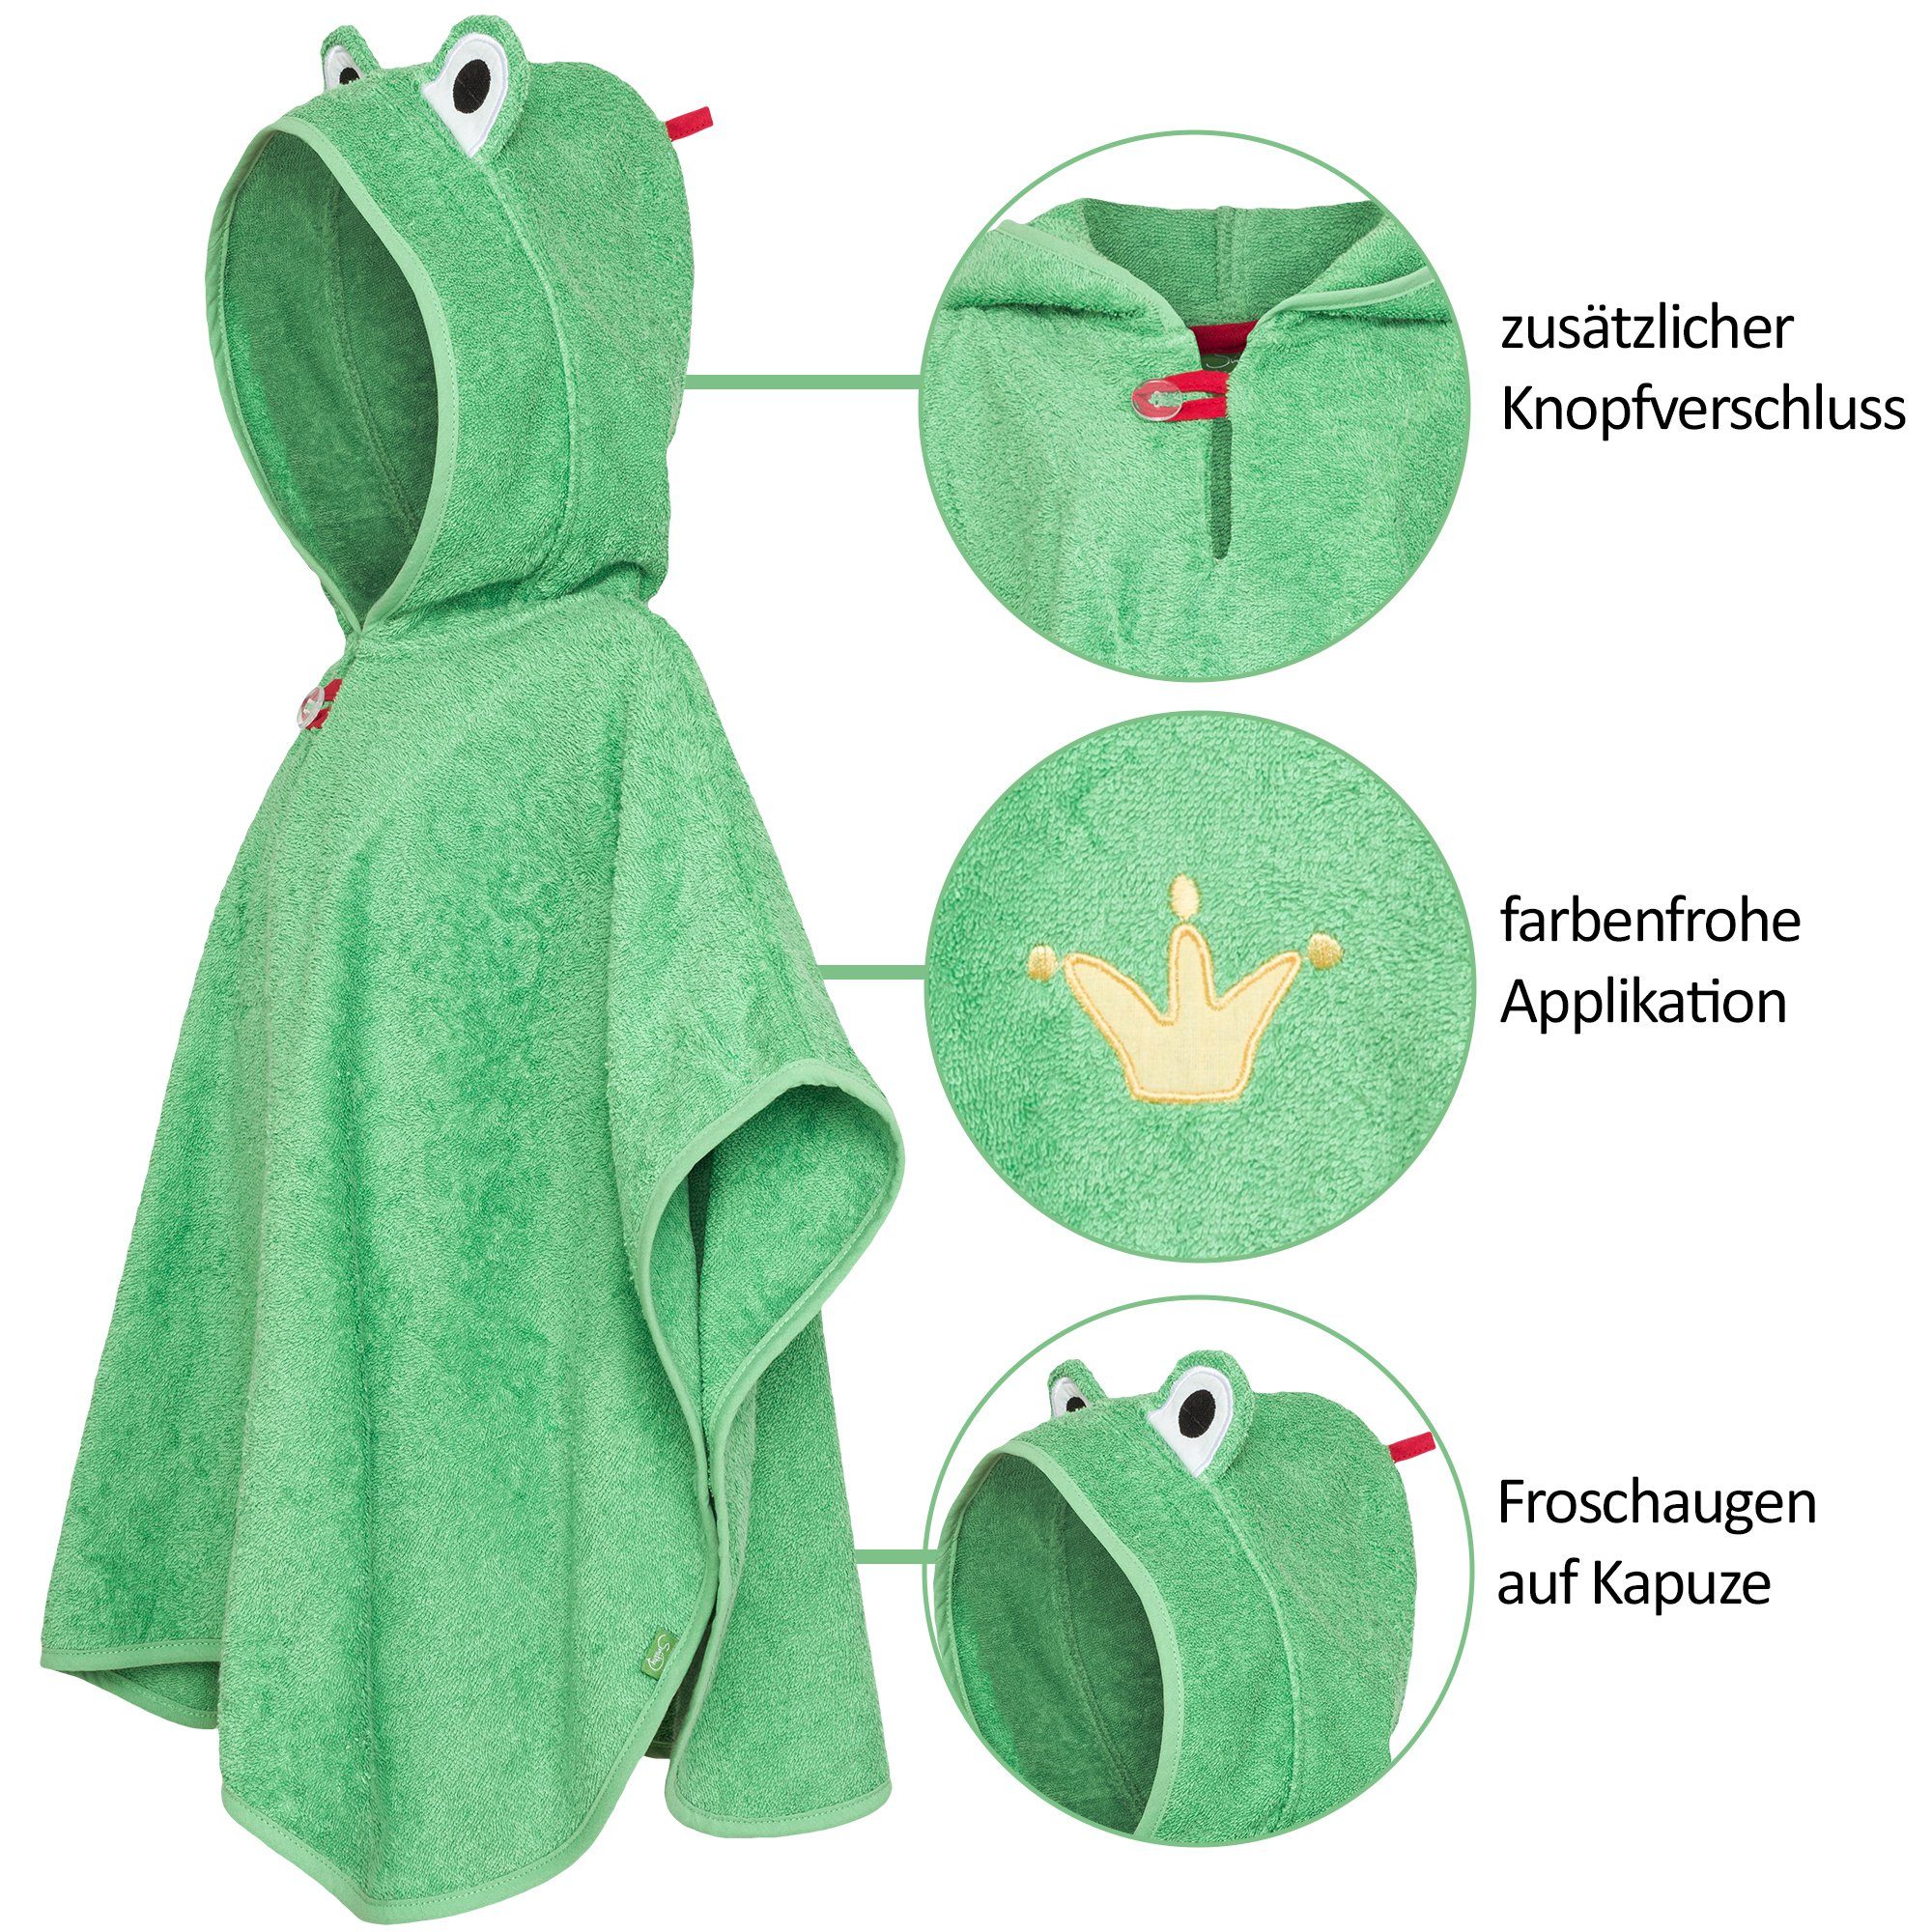 Frosch, in Baby Smithy Knöpfe made grün, Badeponcho Europe am Frottee, Frottee, Armloch,